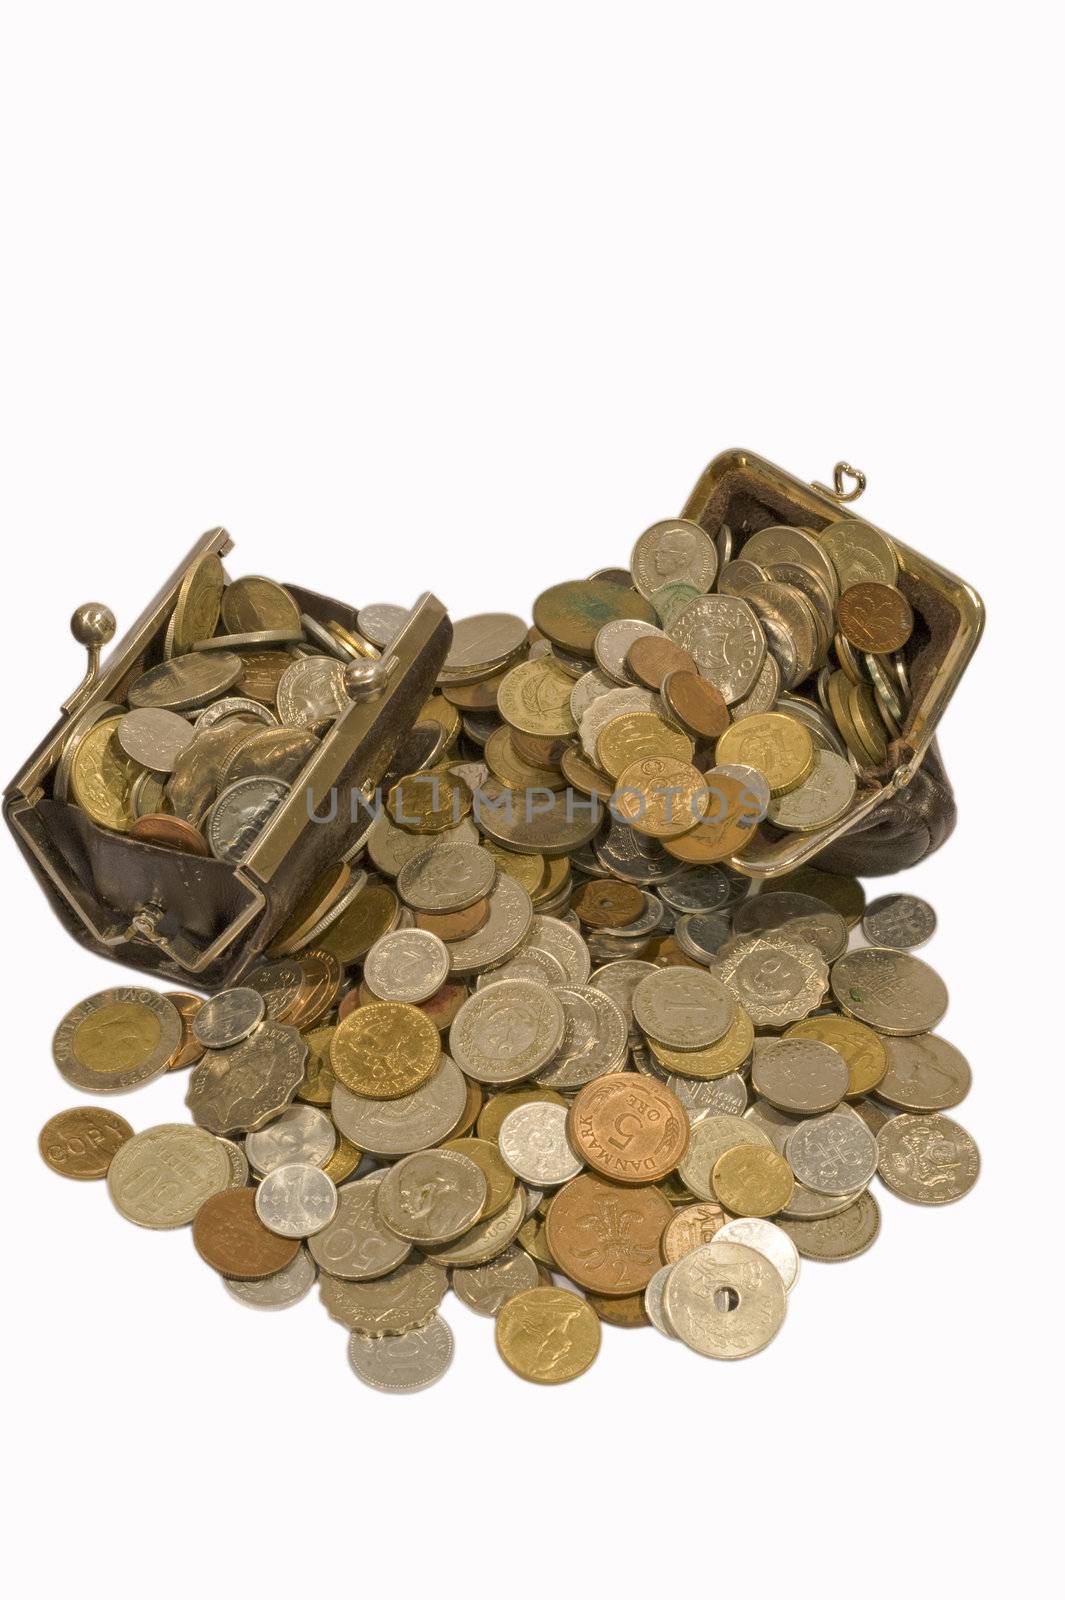 Purse and old coins isolated on the white